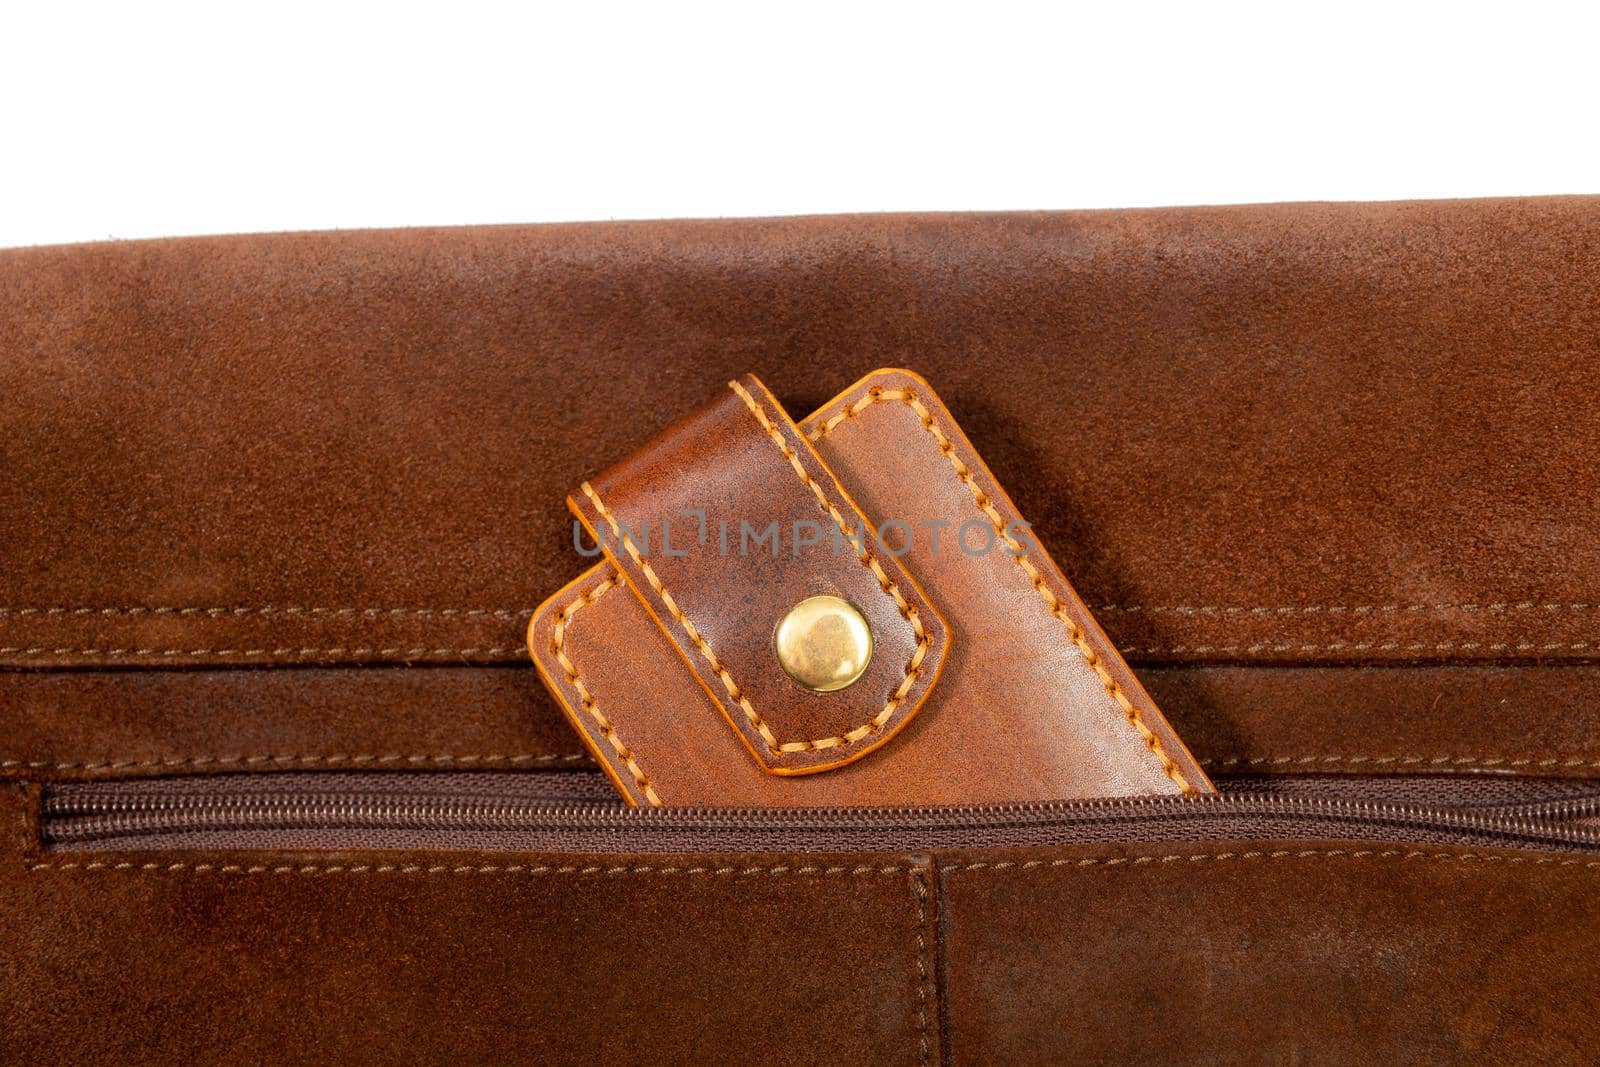 Luxury craft business card holder case made of leather. Brown Leather box for cards in a pocket of bag